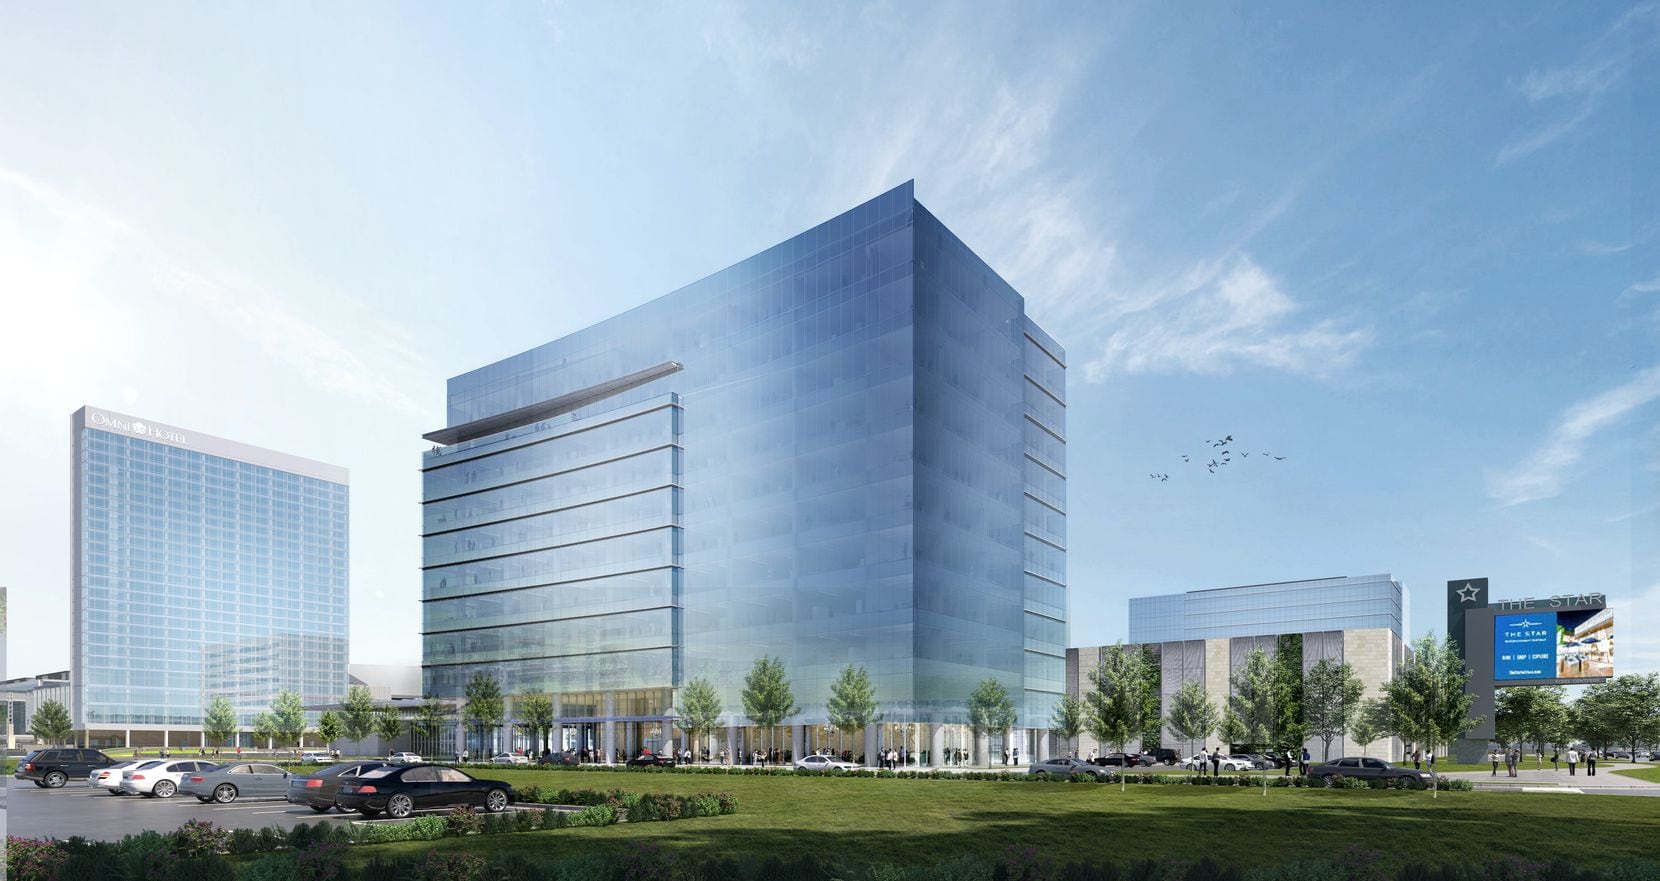 An 11-story office tower on the Dallas North Tollway is the next phase of the Dallas Cowboys' Star mixed-use development in Frisco.